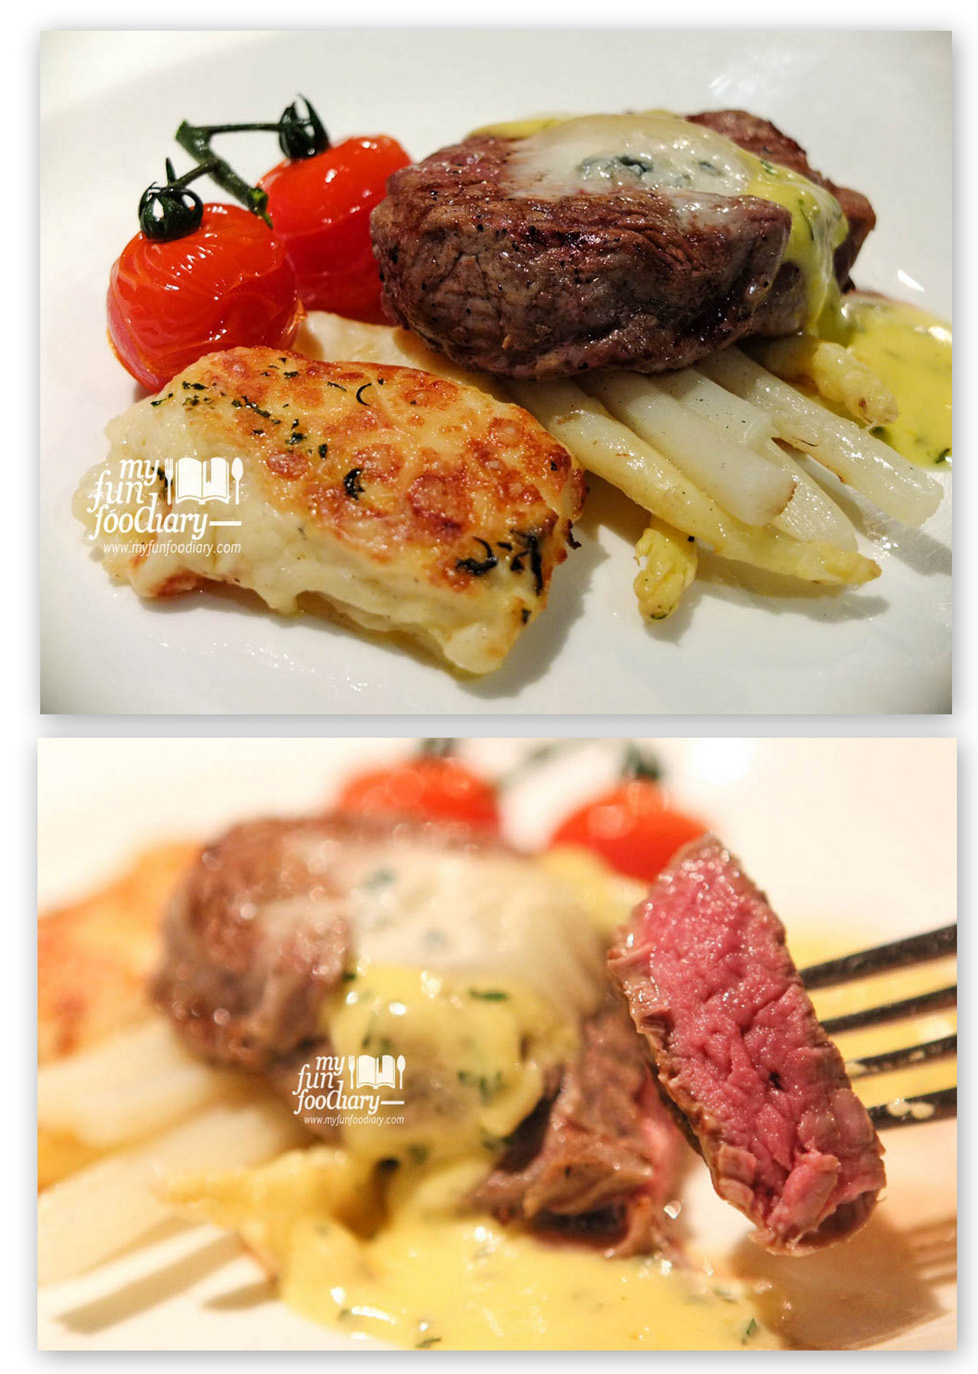 Grilled White Asparagus and Beef Tenderloin